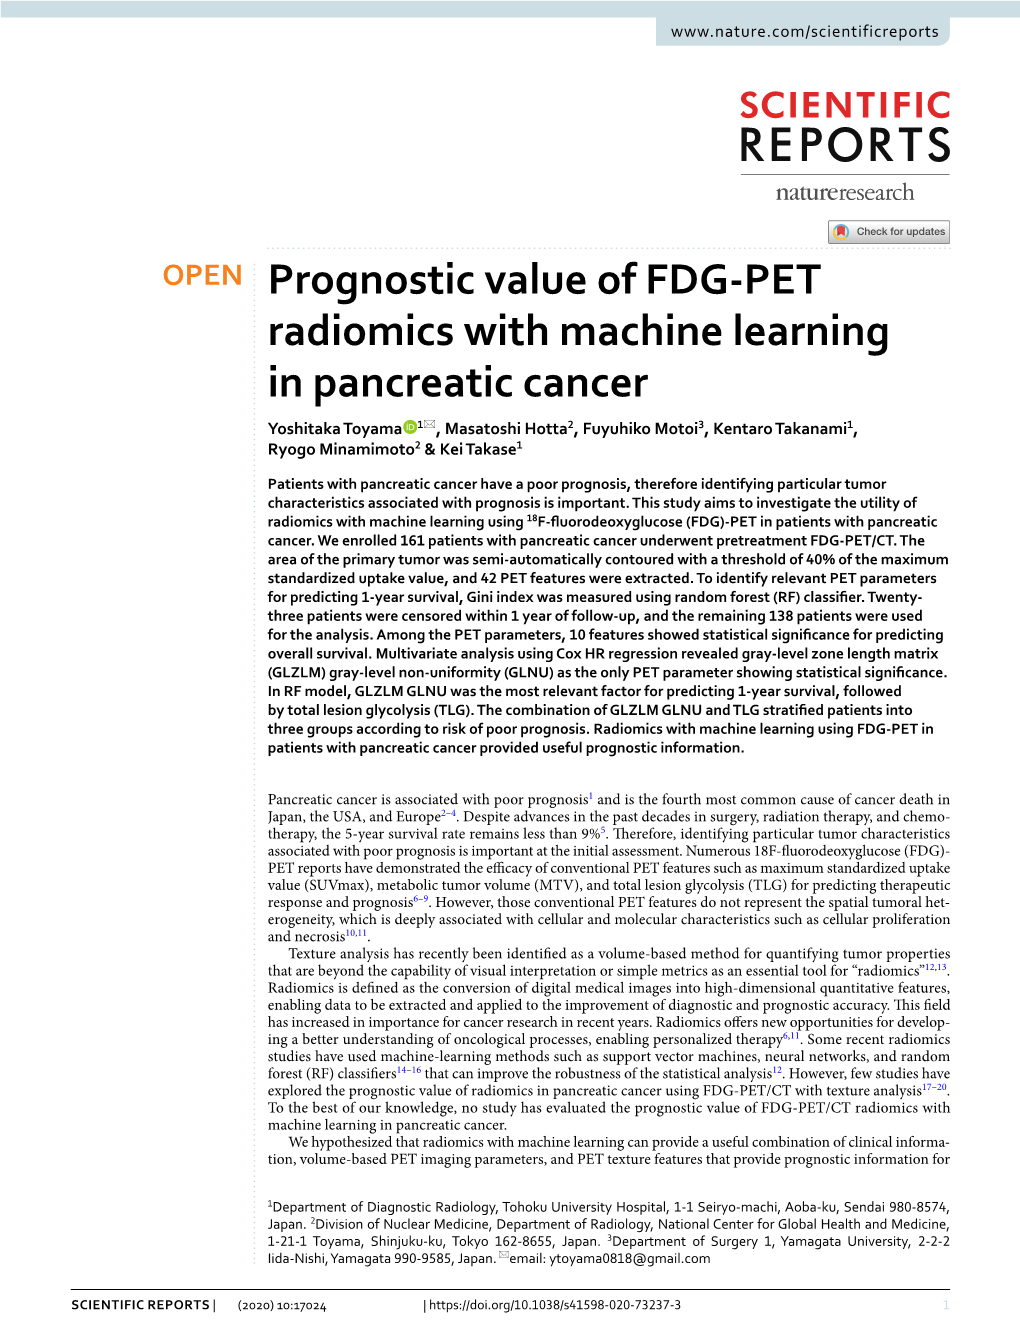 Prognostic Value of FDG-PET Radiomics with Machine Learning in Pancreatic Cancer